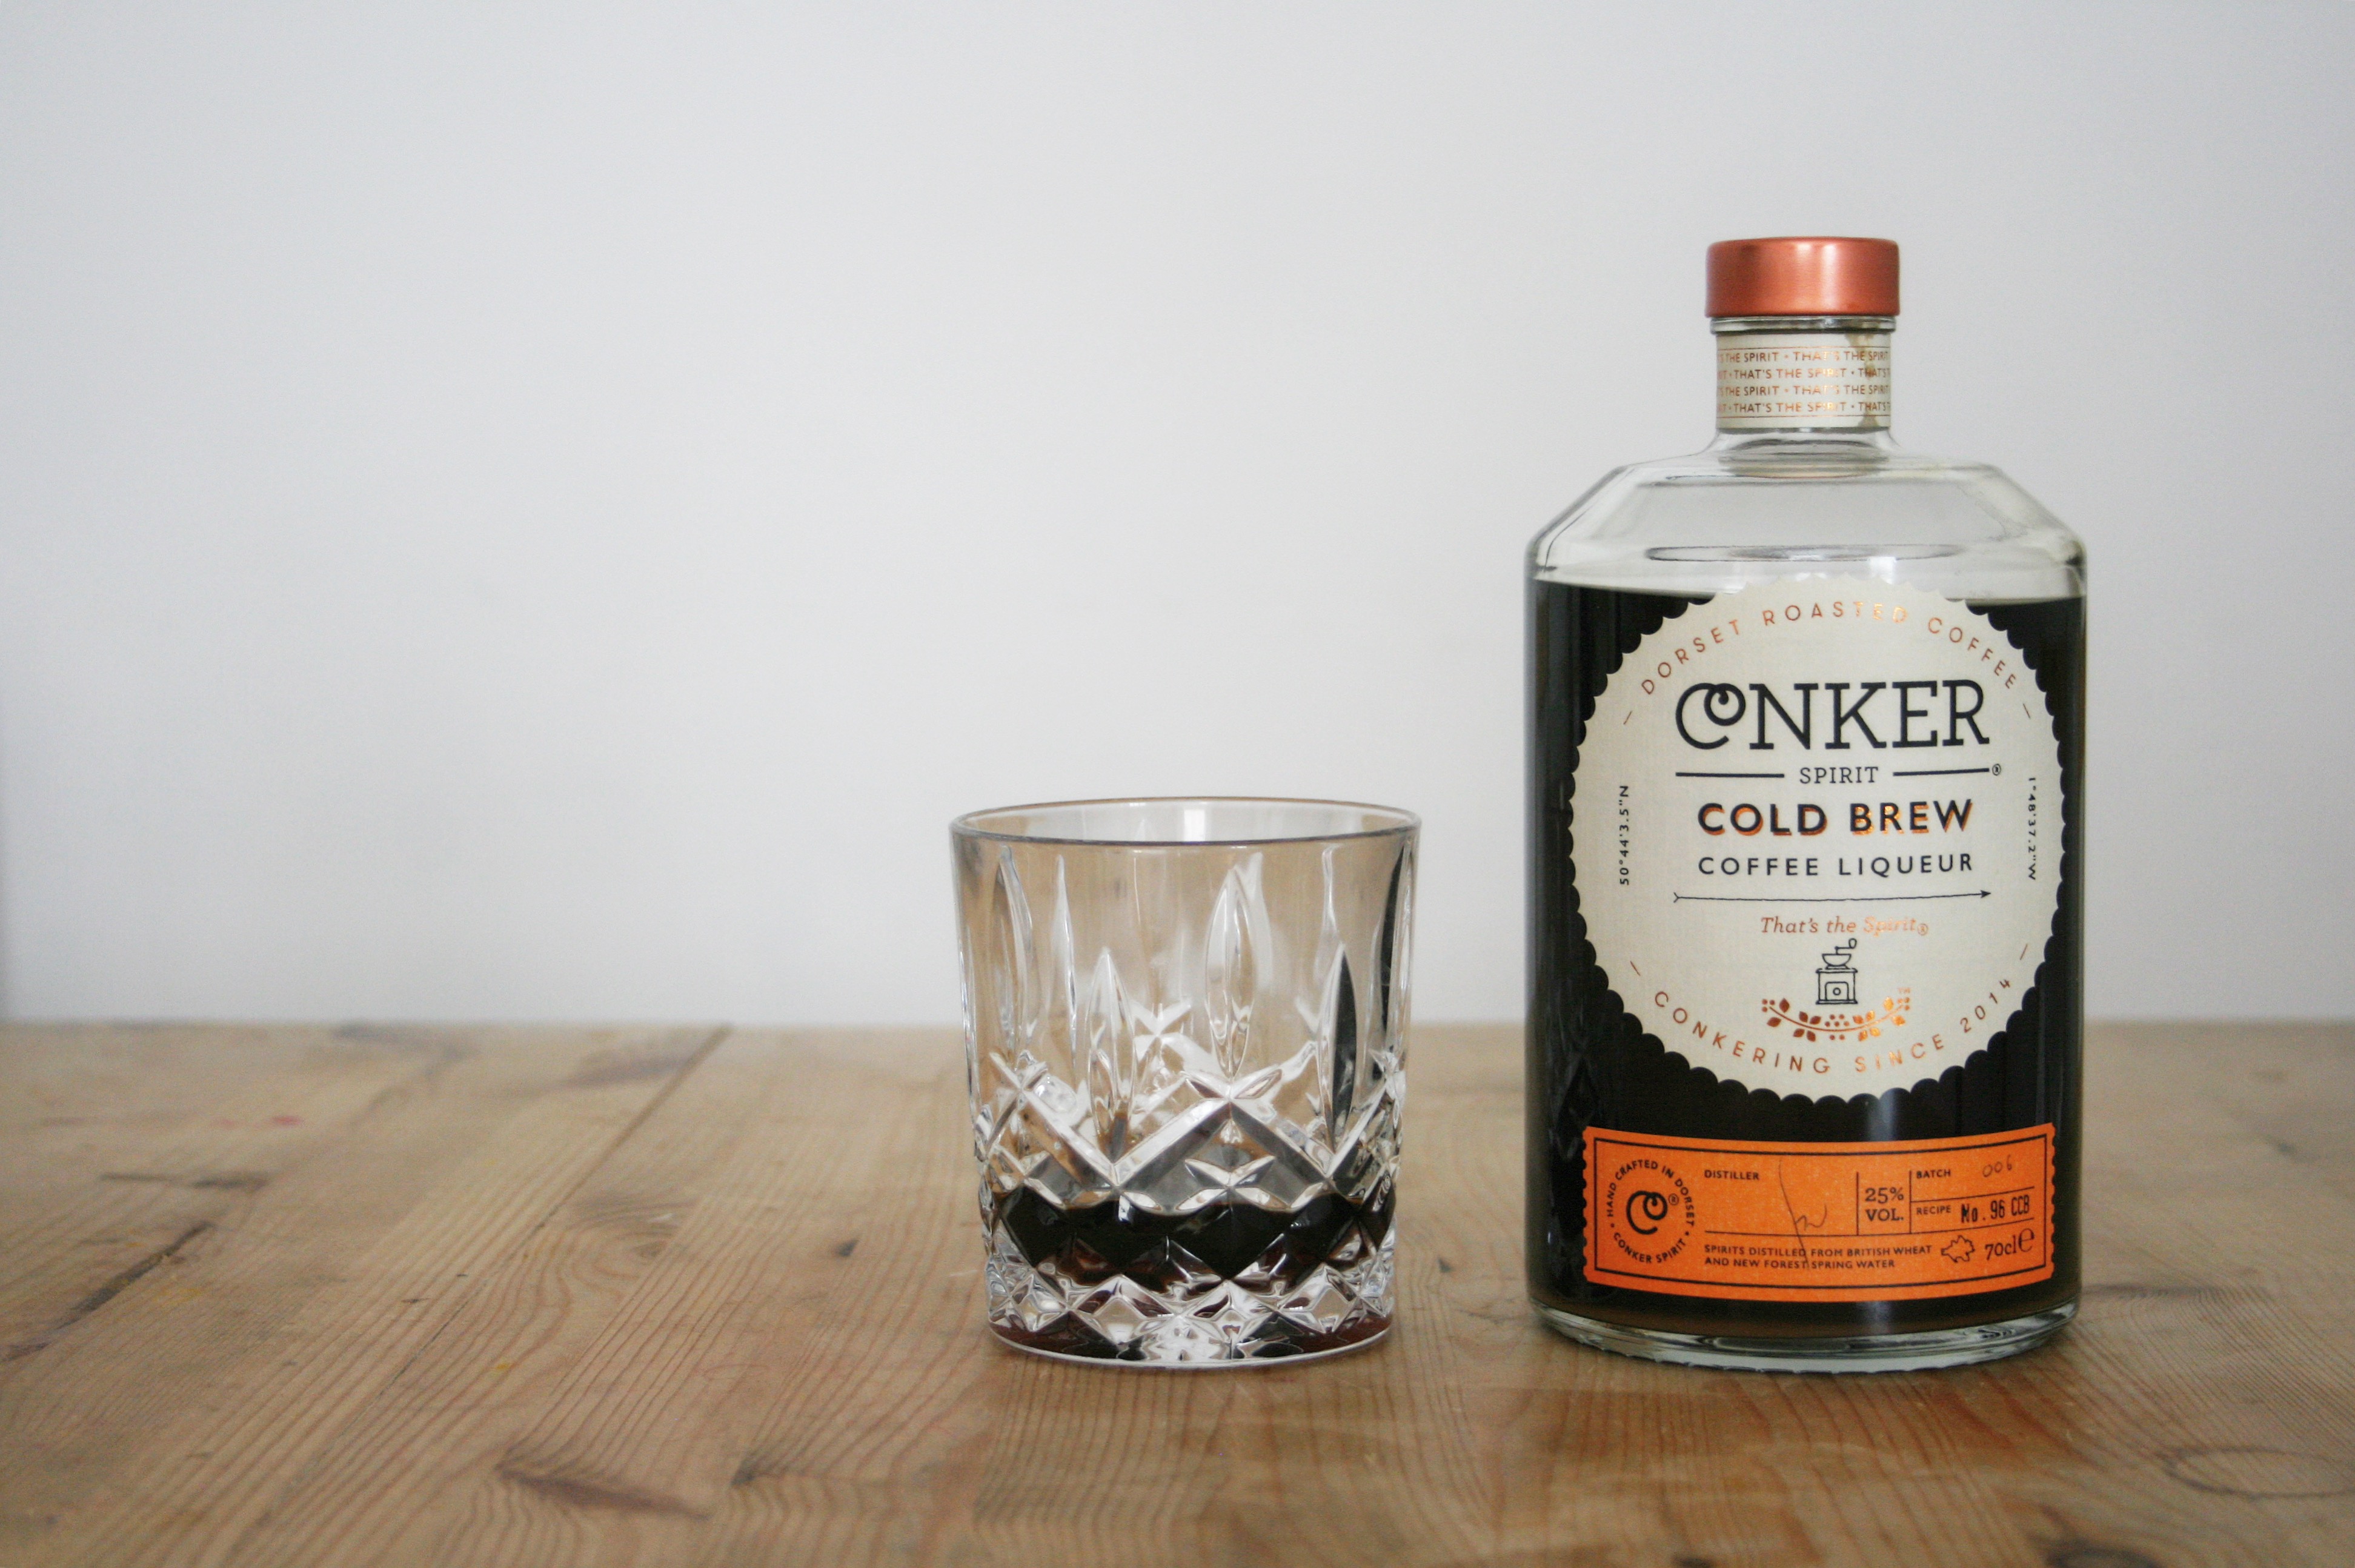 Review of Conker Spirit’s Cold Brew Liqueur